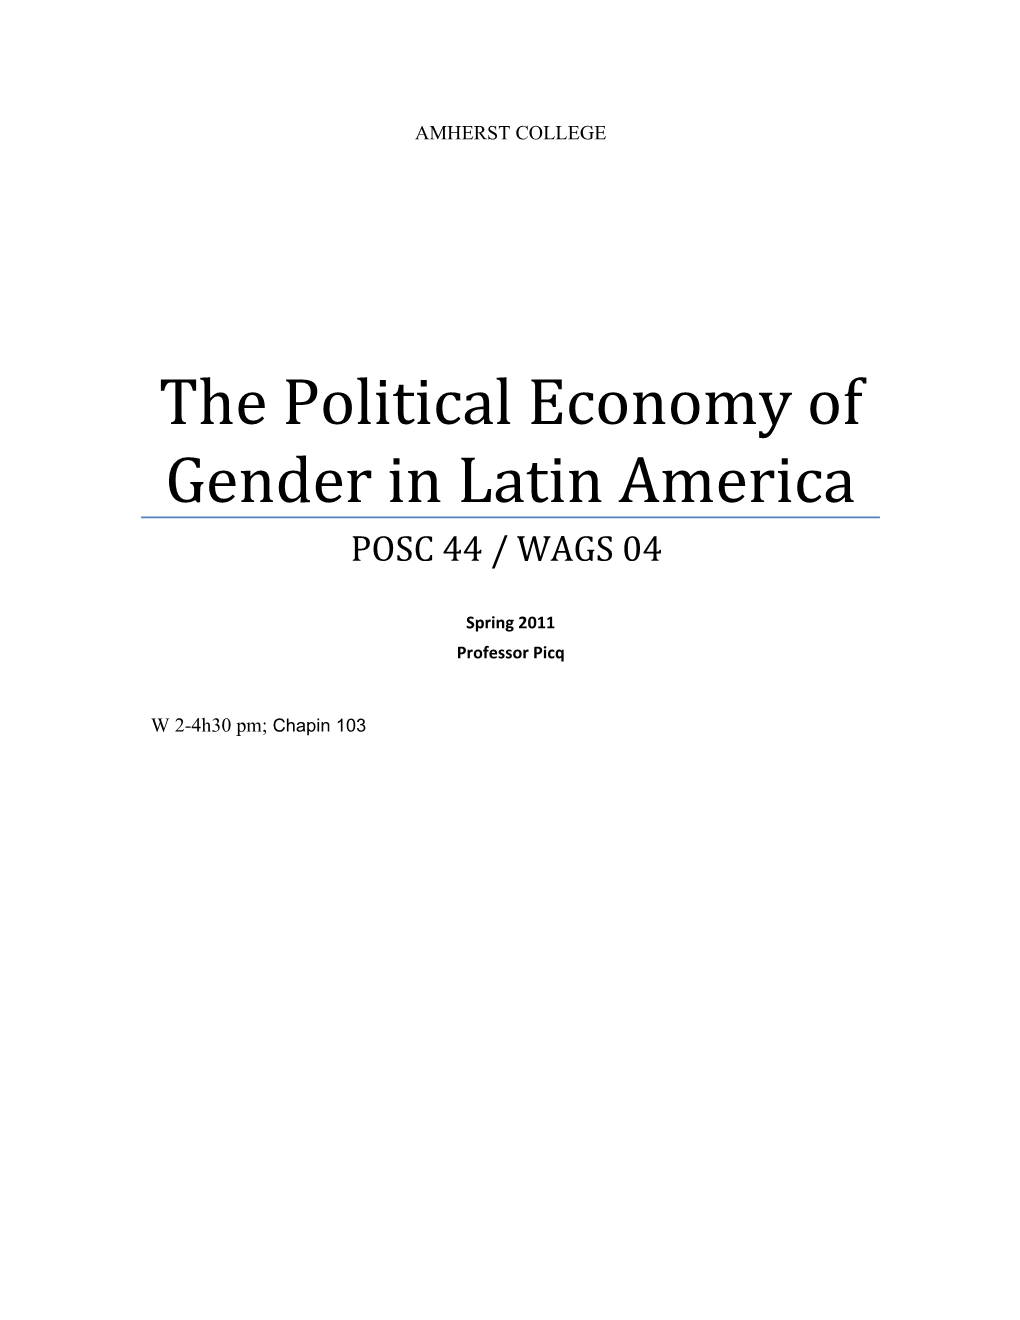 The Political Economy of Gender in Latin America